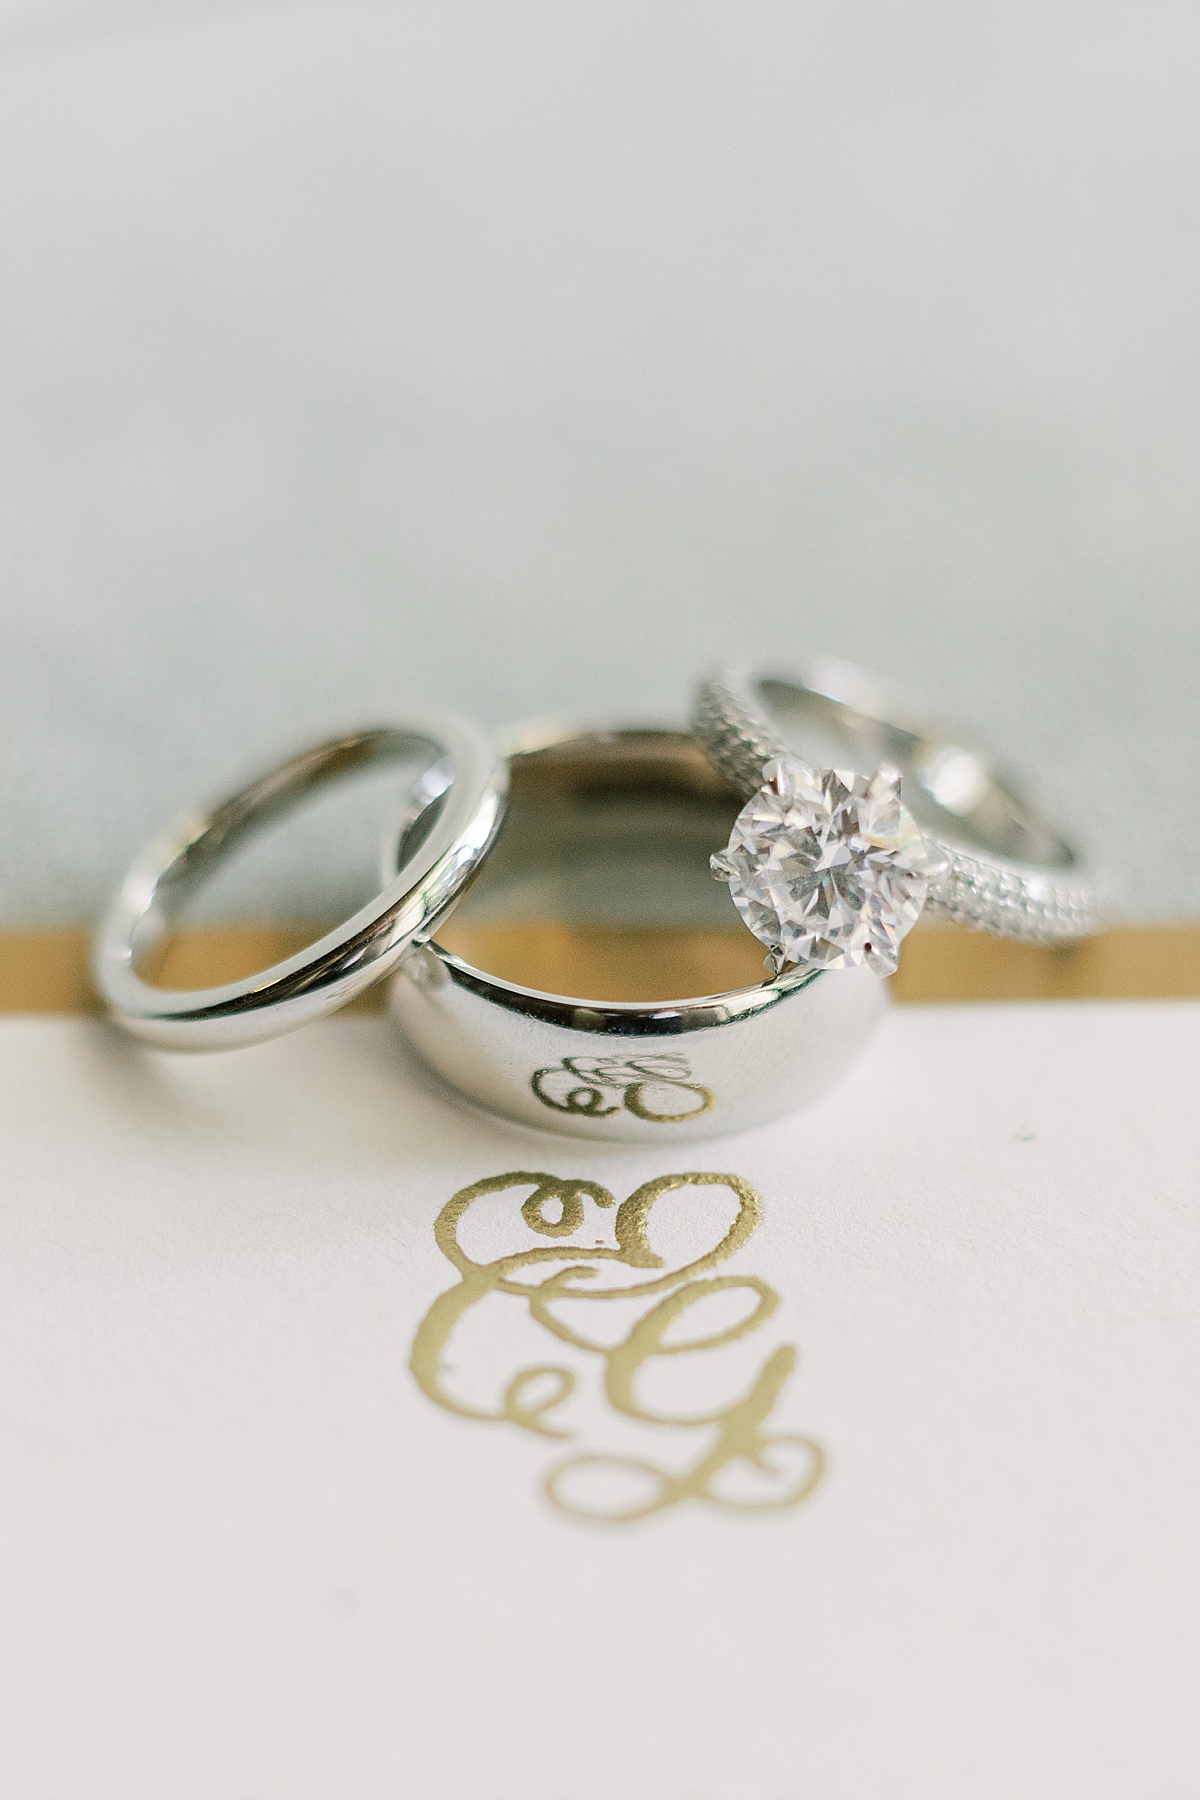 The couple's rings next to the insignia of their wedding invitation